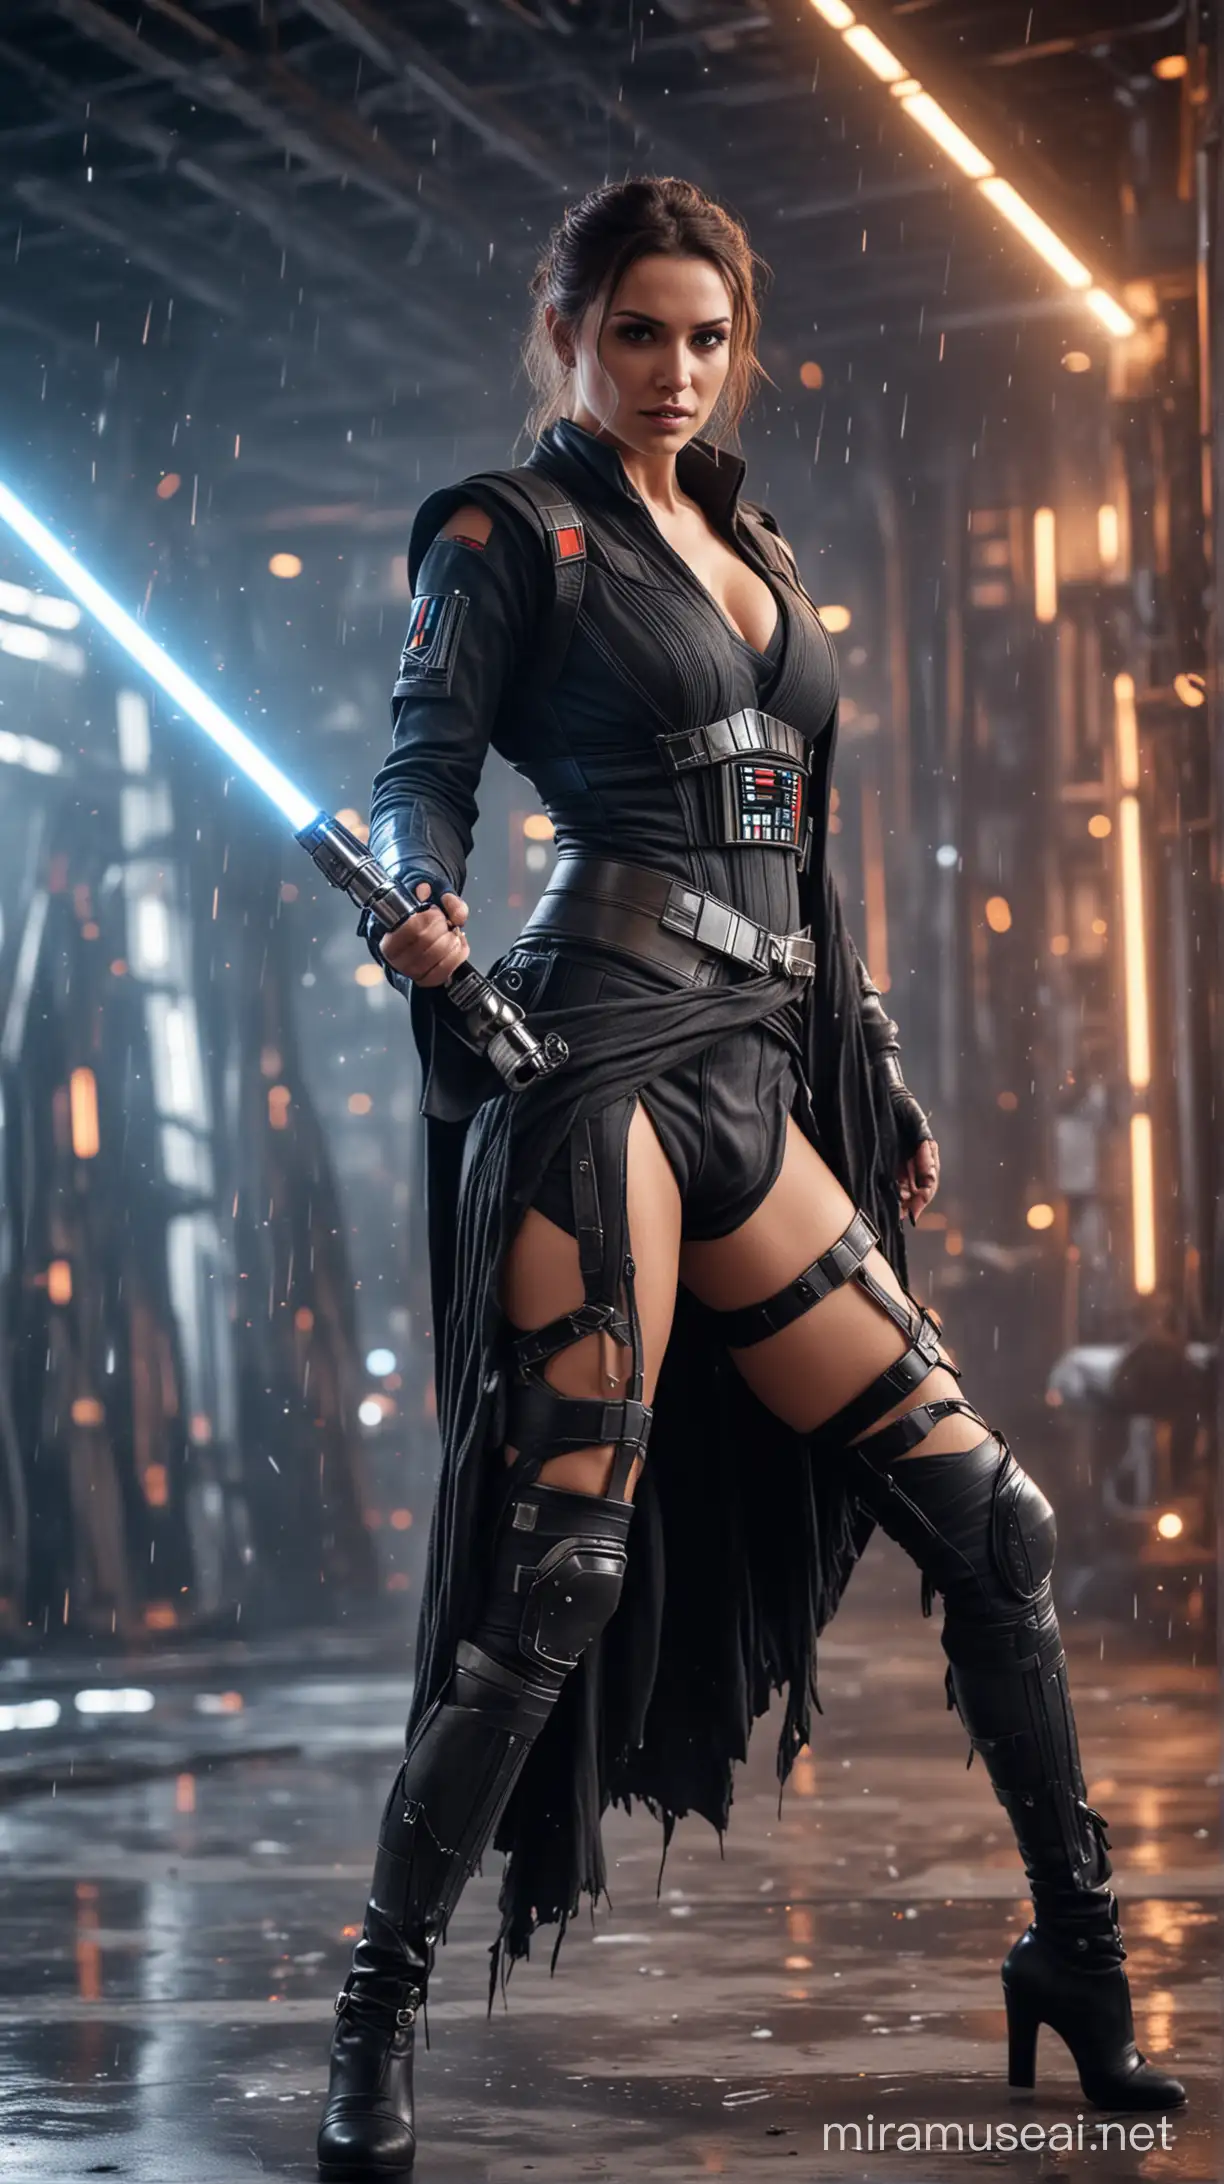 Busty Woman Swinging Lightsaber on Spacestation